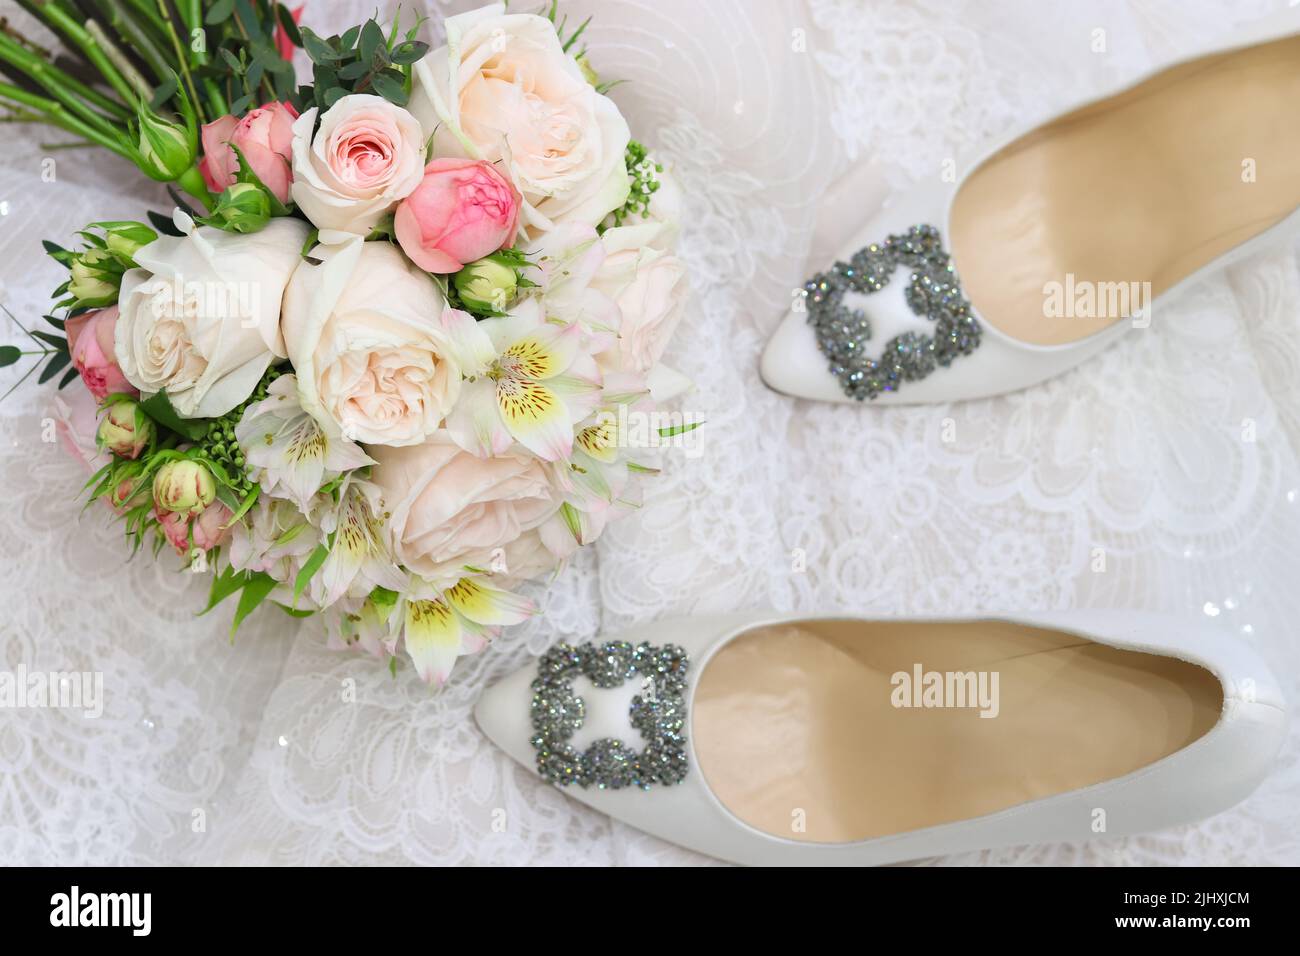 Wedding day composition with silk white shoes, pastel bridal bouquet on white lace blurry background. Top view Stock Photo